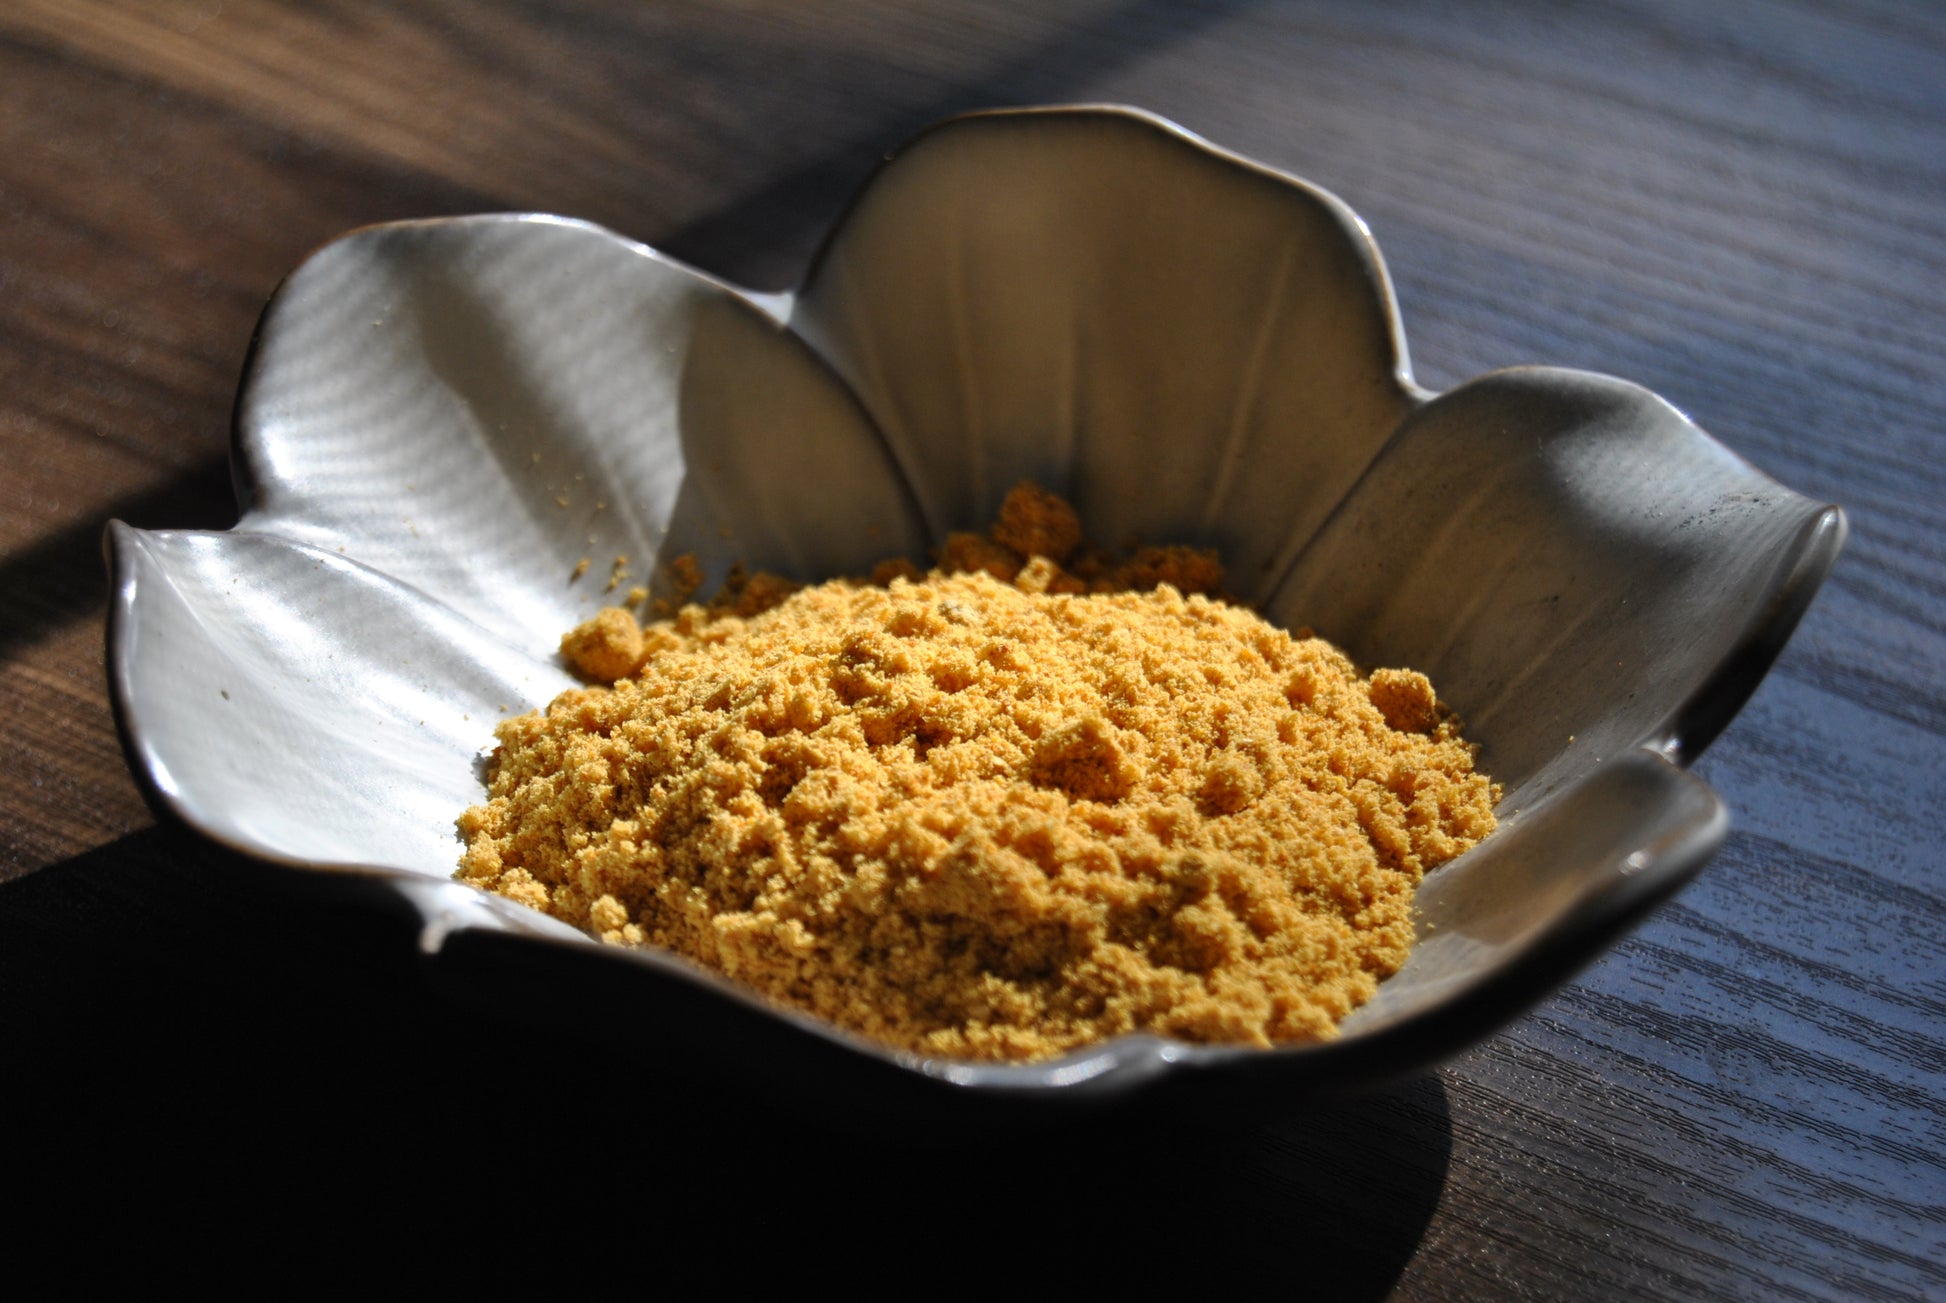 A close up view of a orange and yellow powder rests in a white, flower shaped dish on a wooden surface.